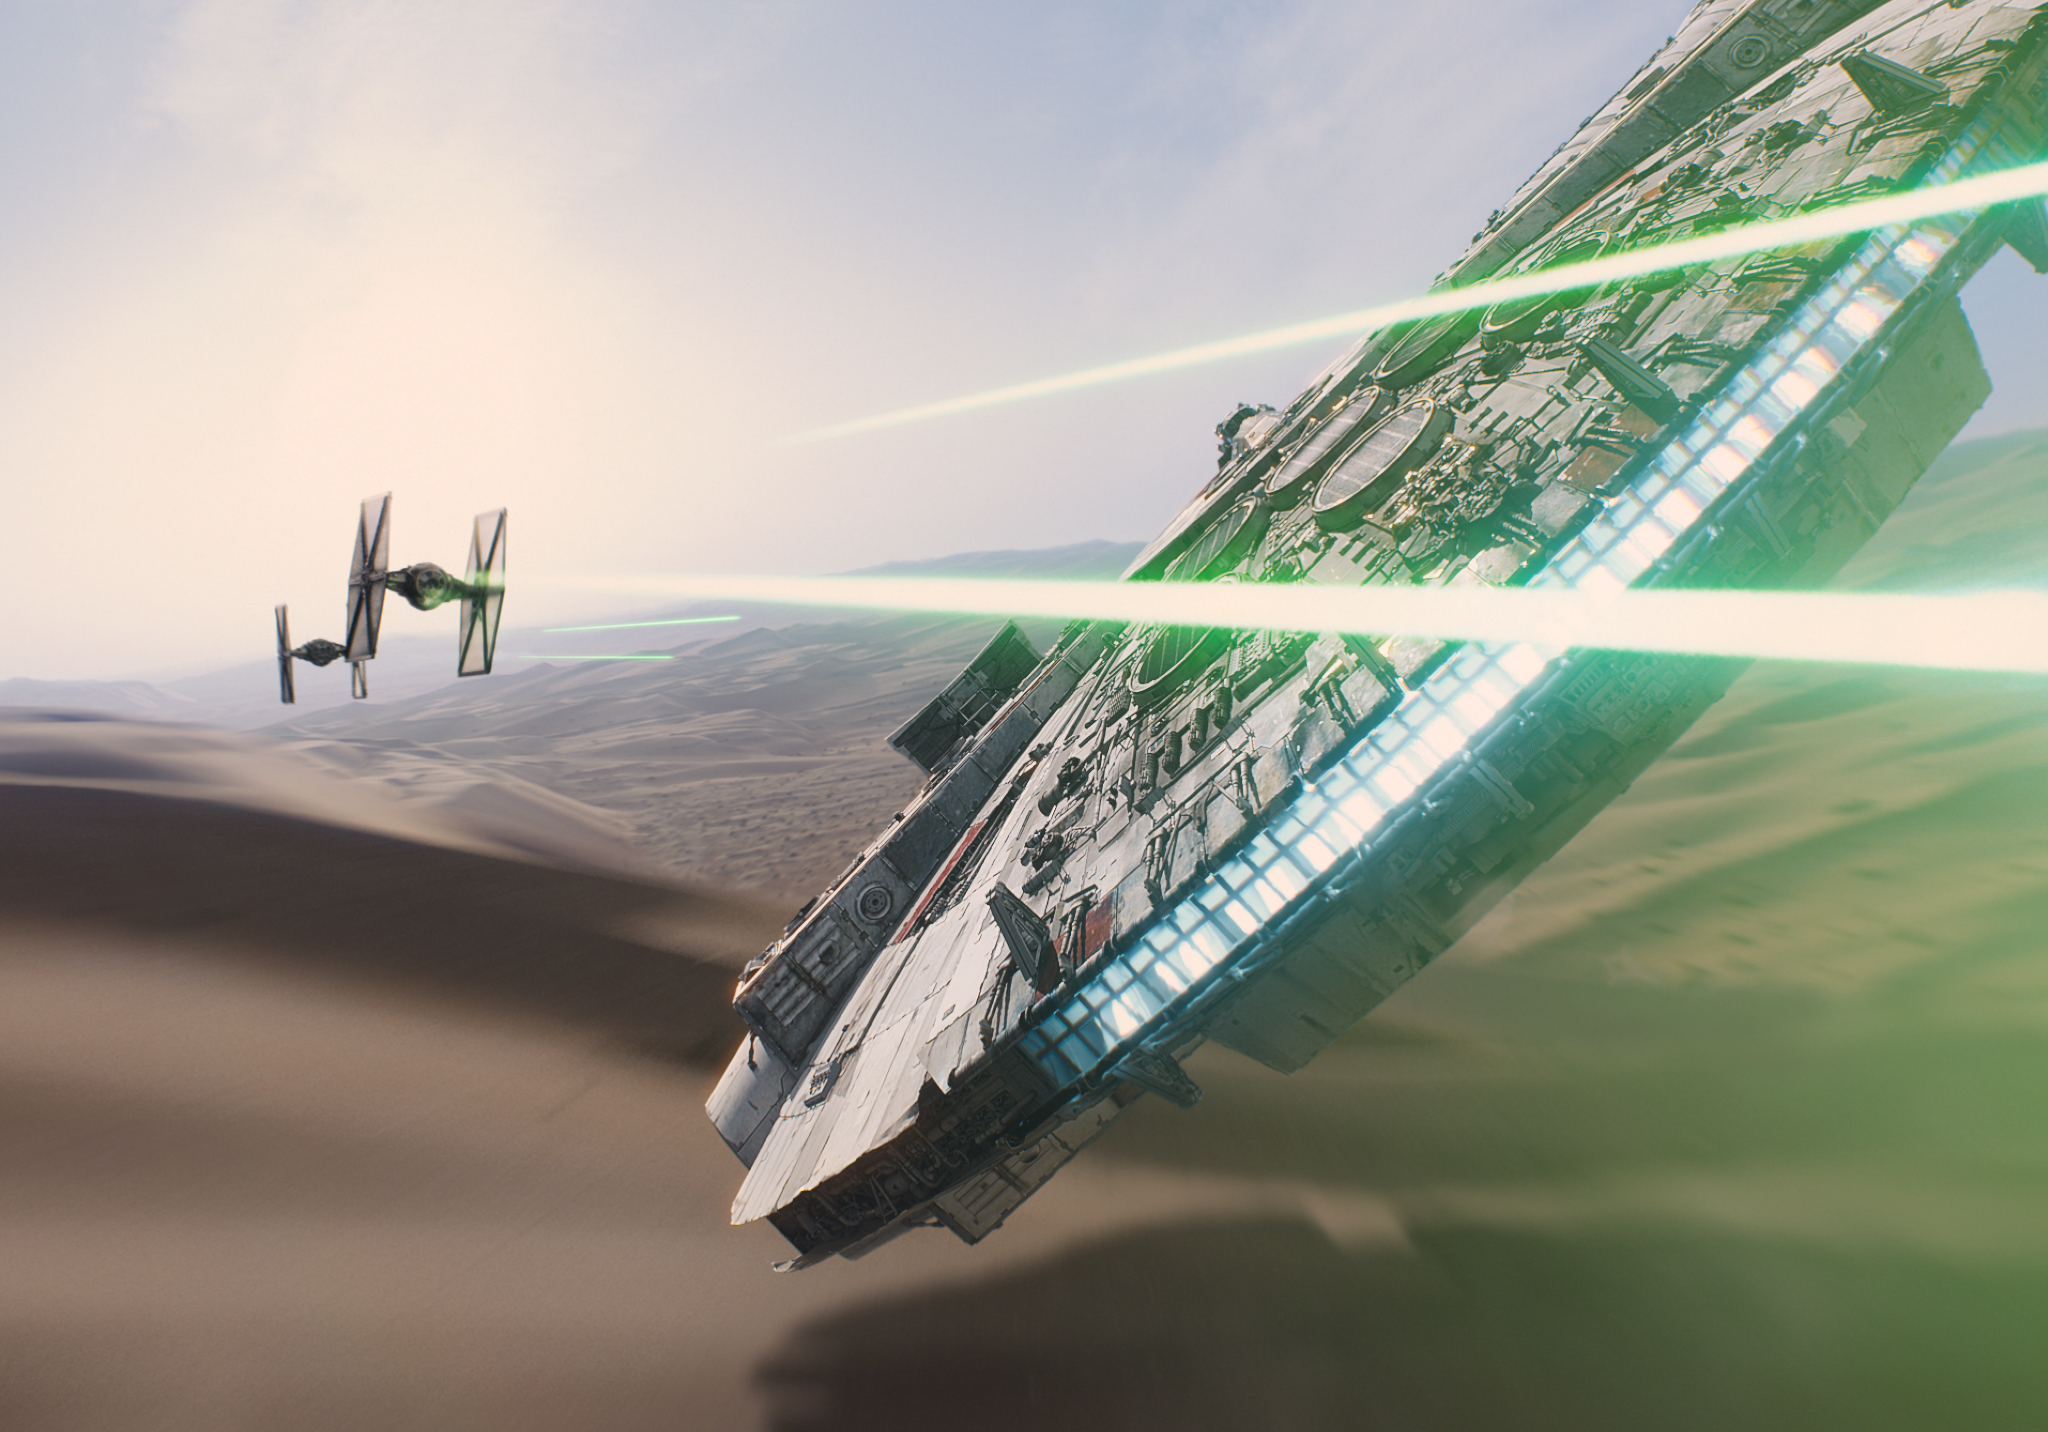 A scene from "Star Wars: The Force Awakens," expected in theaters on Dec. 18, 2015.